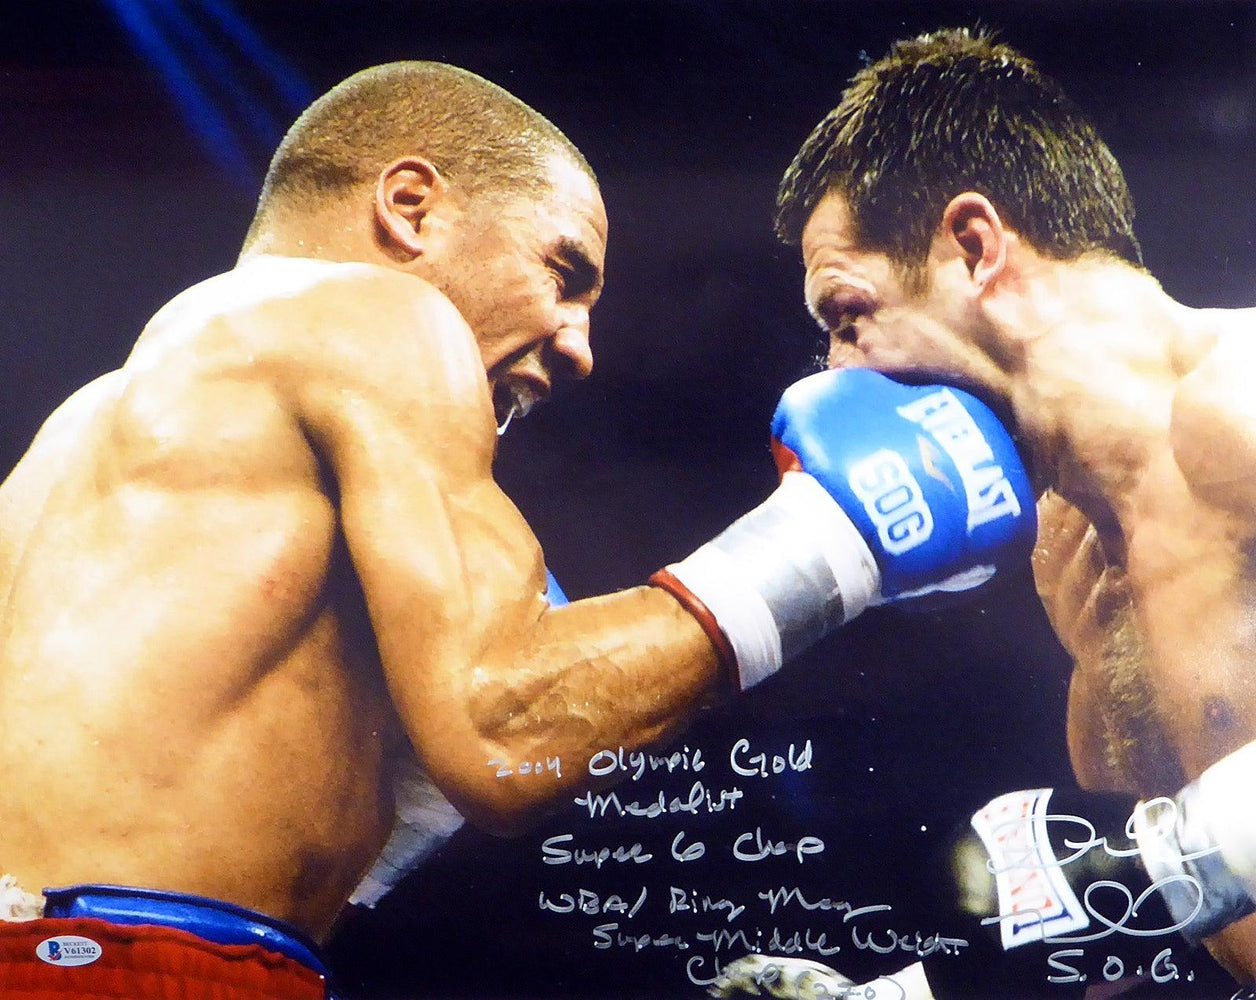 Andre Ward Autographed 16x20 Photo "2004 Olympic Gold Medalist, Super 6 Champ, WBA/Ring Mag Super Middle Weight Champ, 27-0, SOG" Beckett BAS #V61302 - RSA